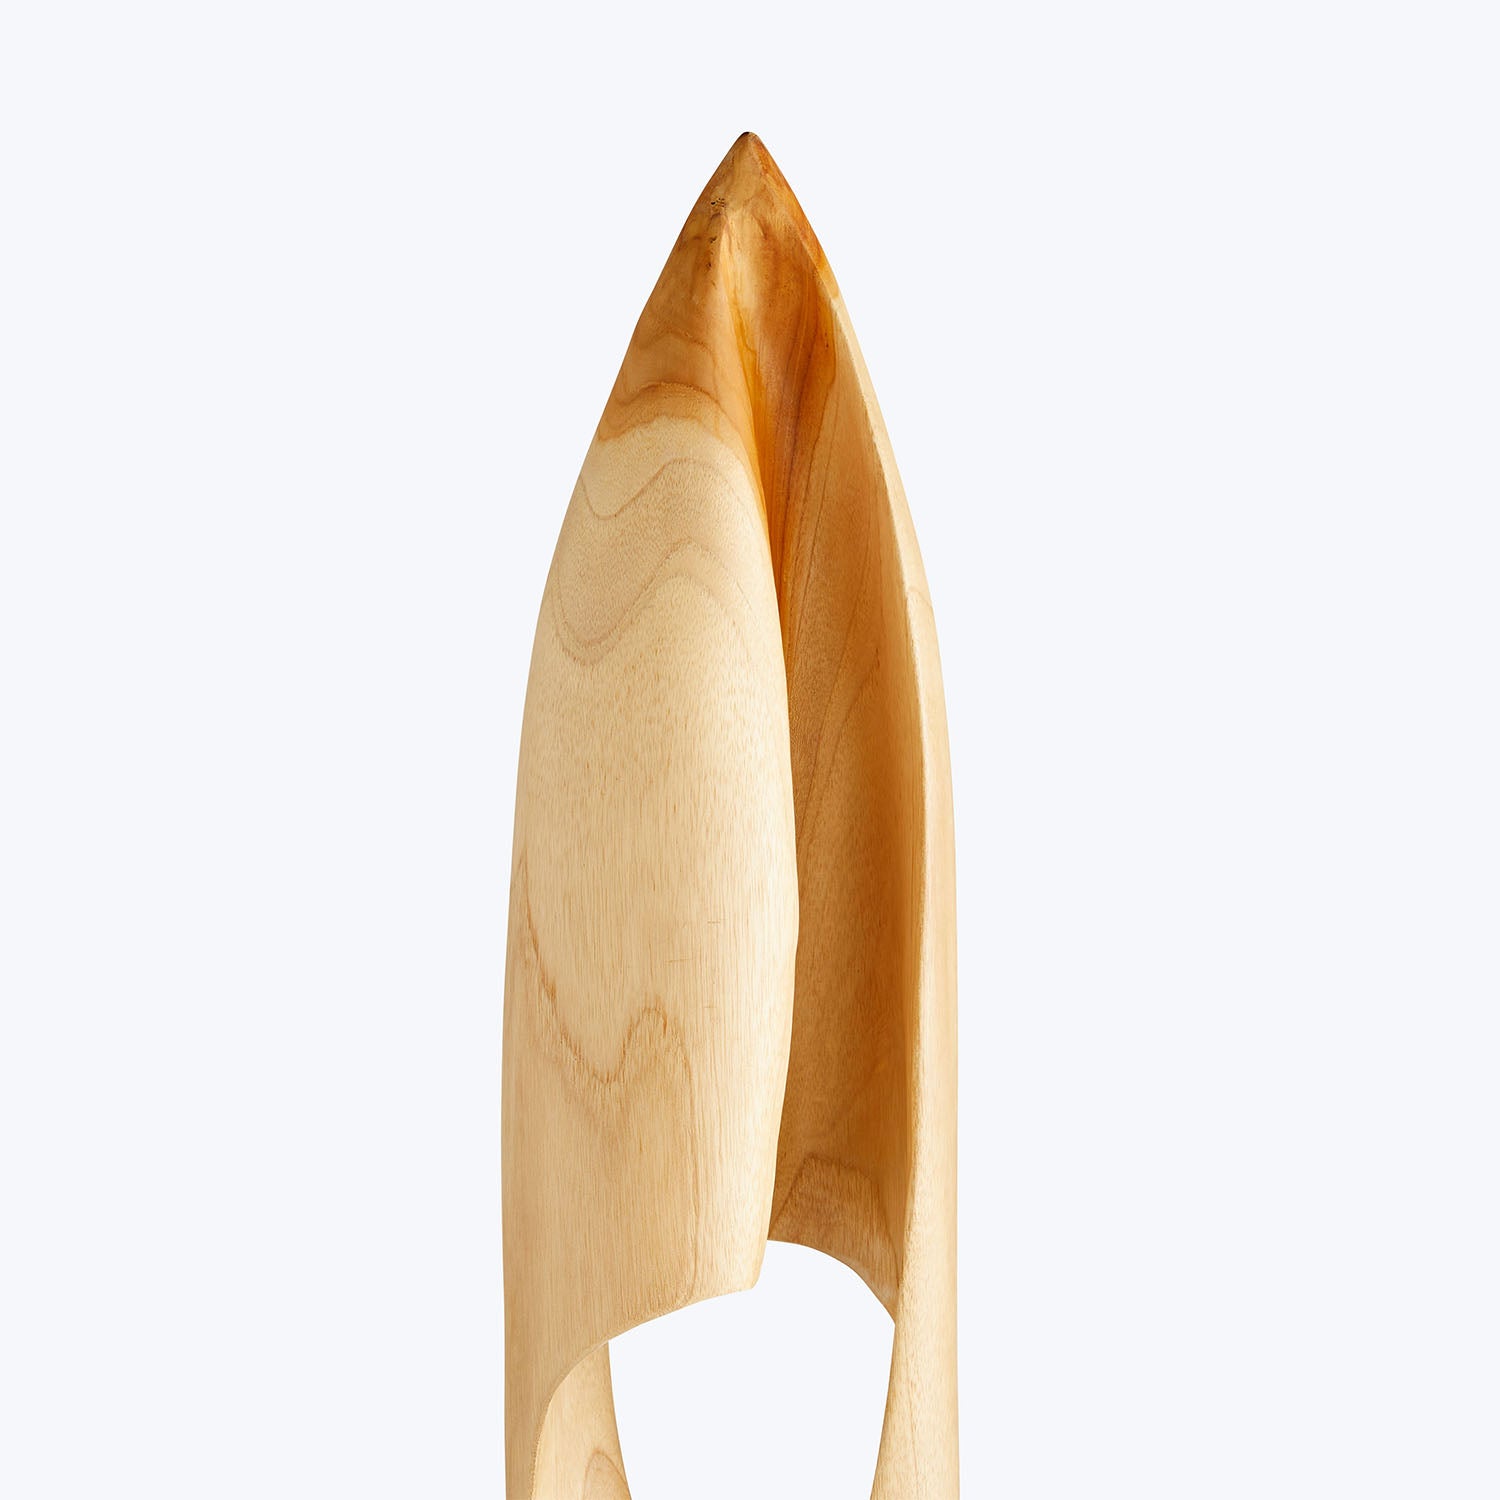 Light-colored wooden salad tong with smooth texture and natural grain